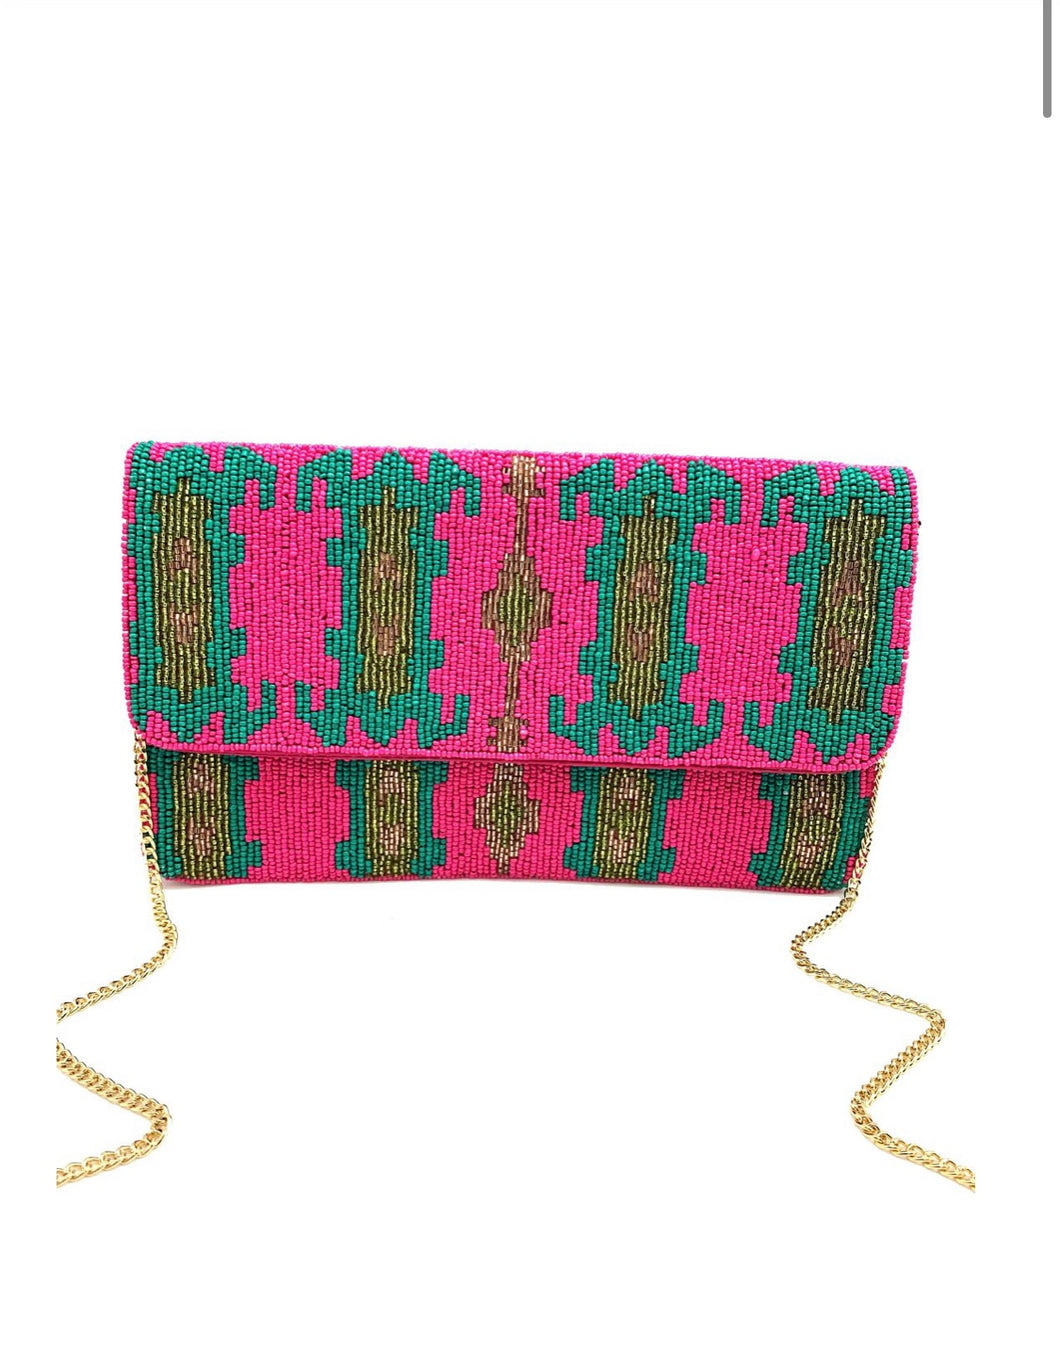 Beaded Fab Pink and Green Clutch